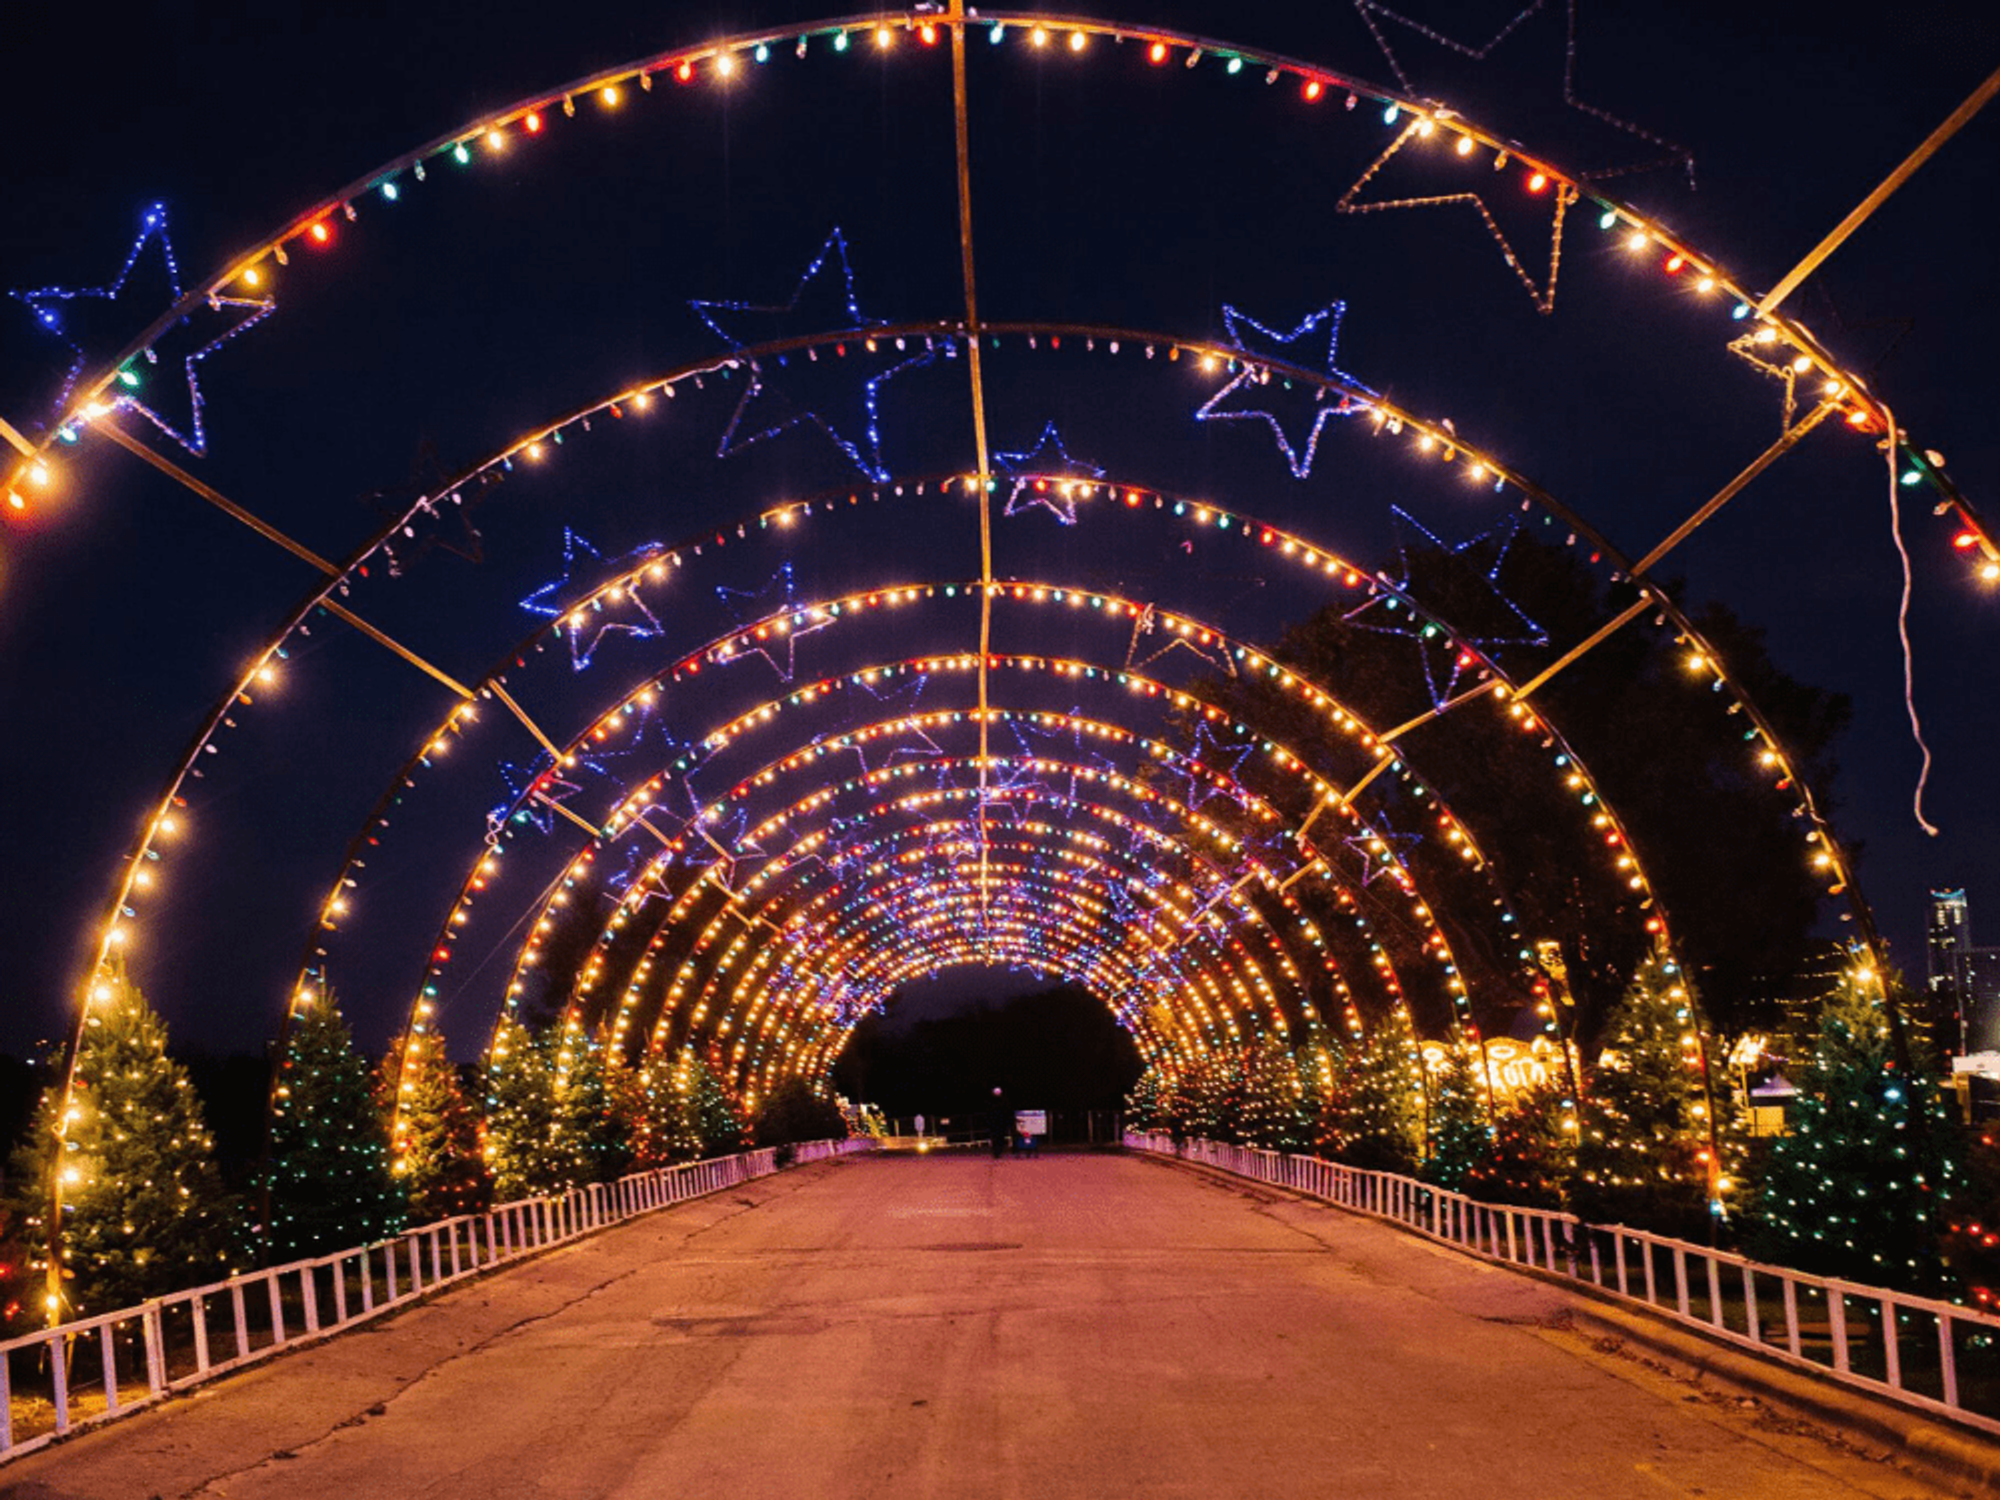 Trail of Lights is back for 2020.